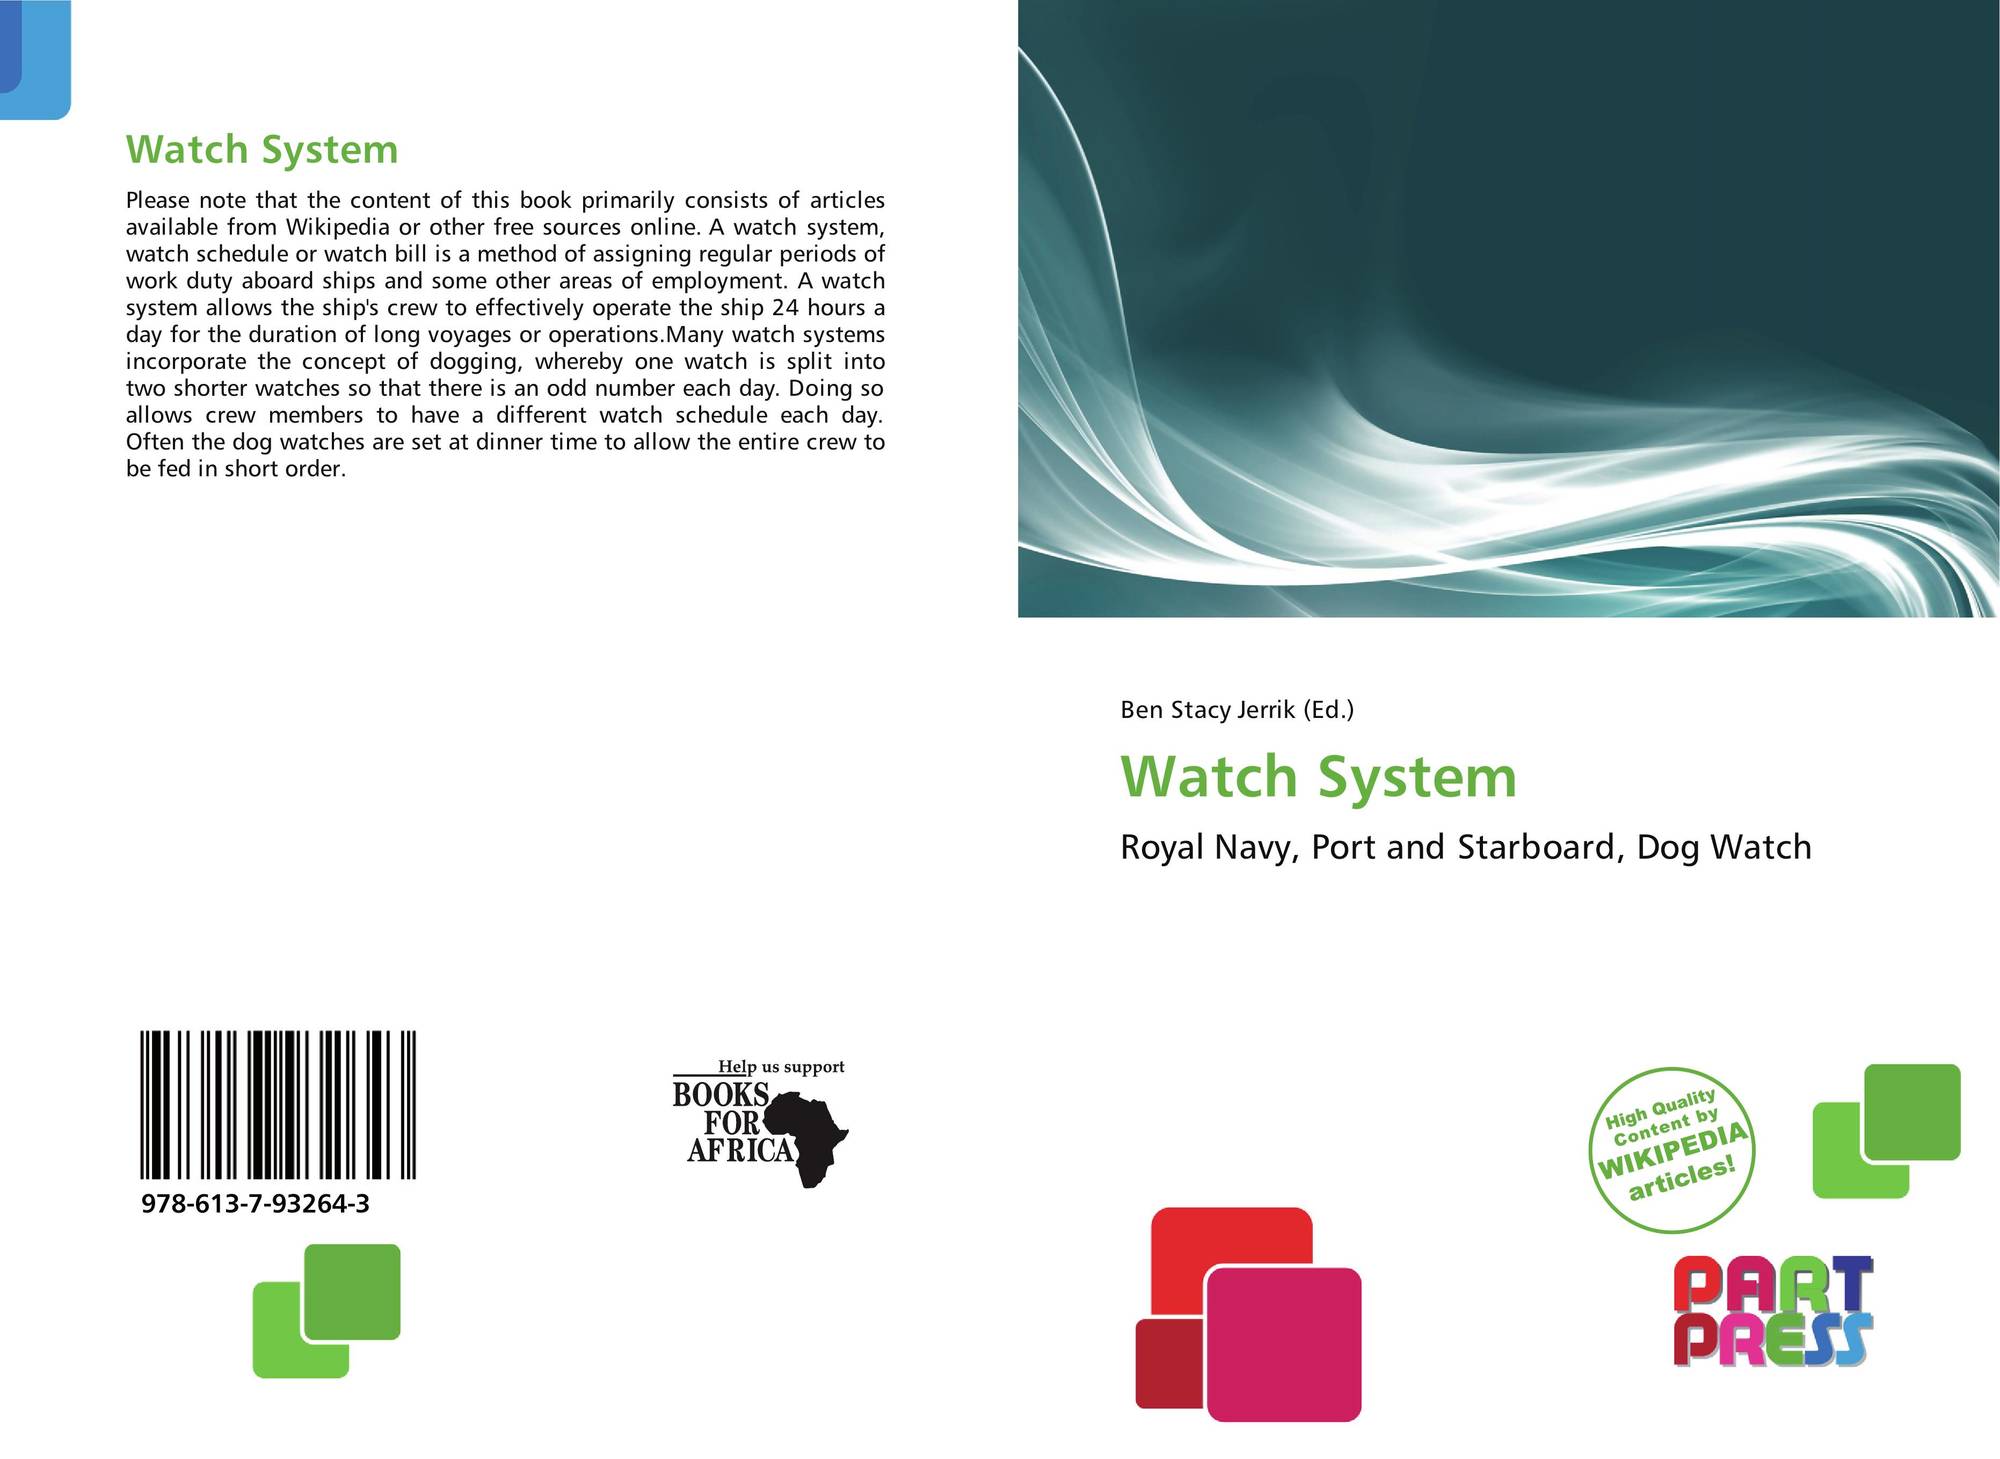 The system watch